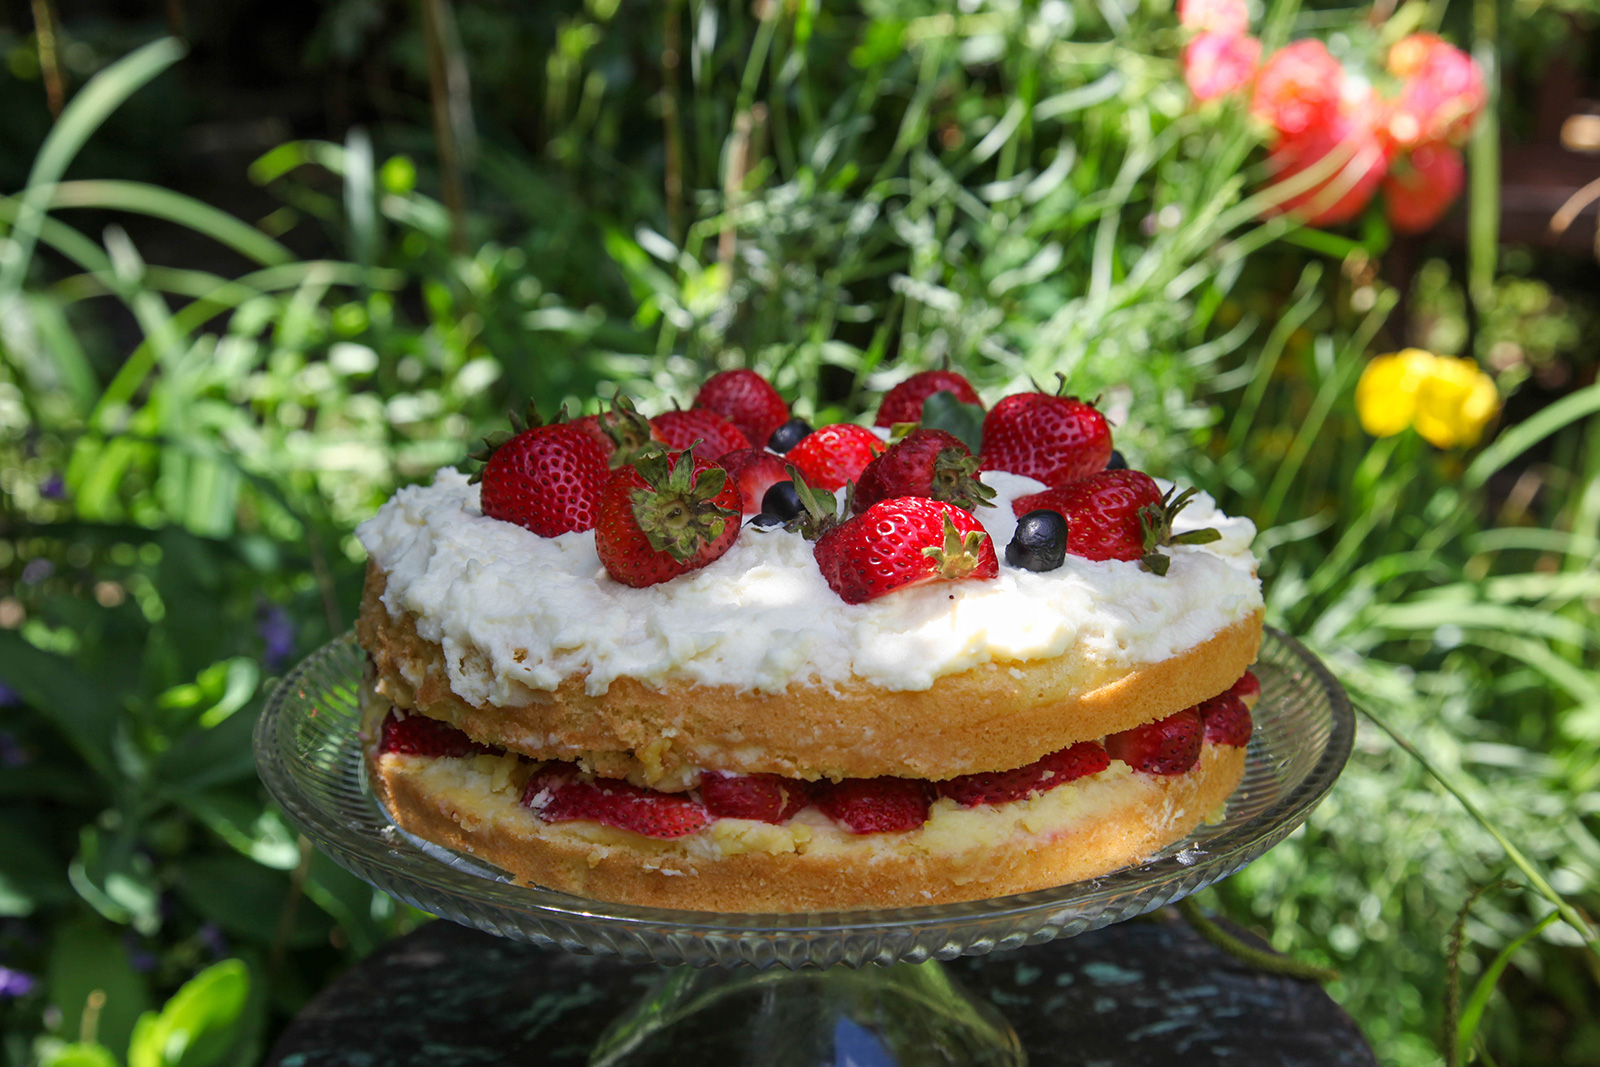 Strawberry Cake with Chantilly Cream, in the garden ready to serve